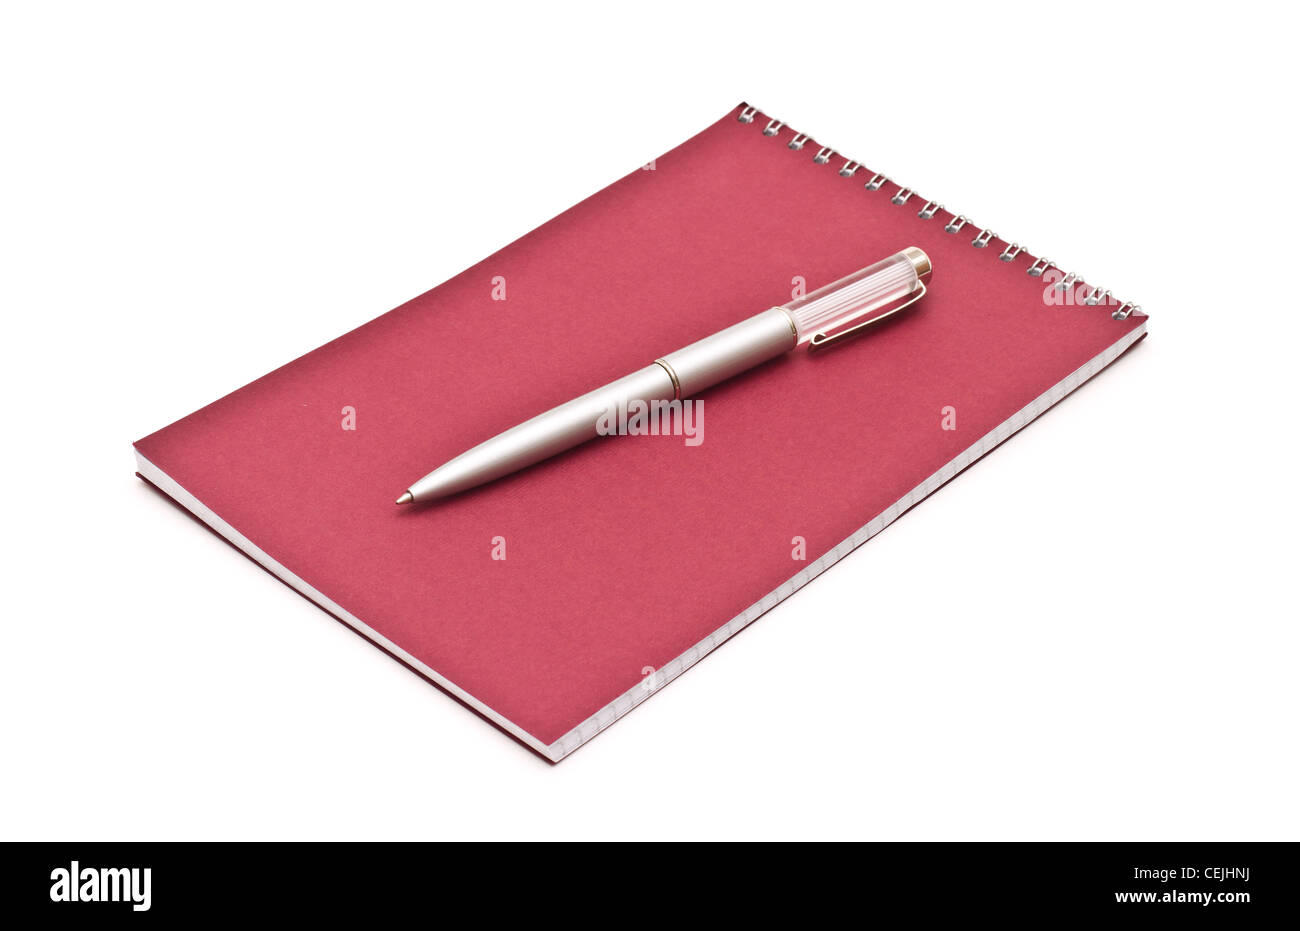 Notebook with silver pen, isolated on white Stock Photo